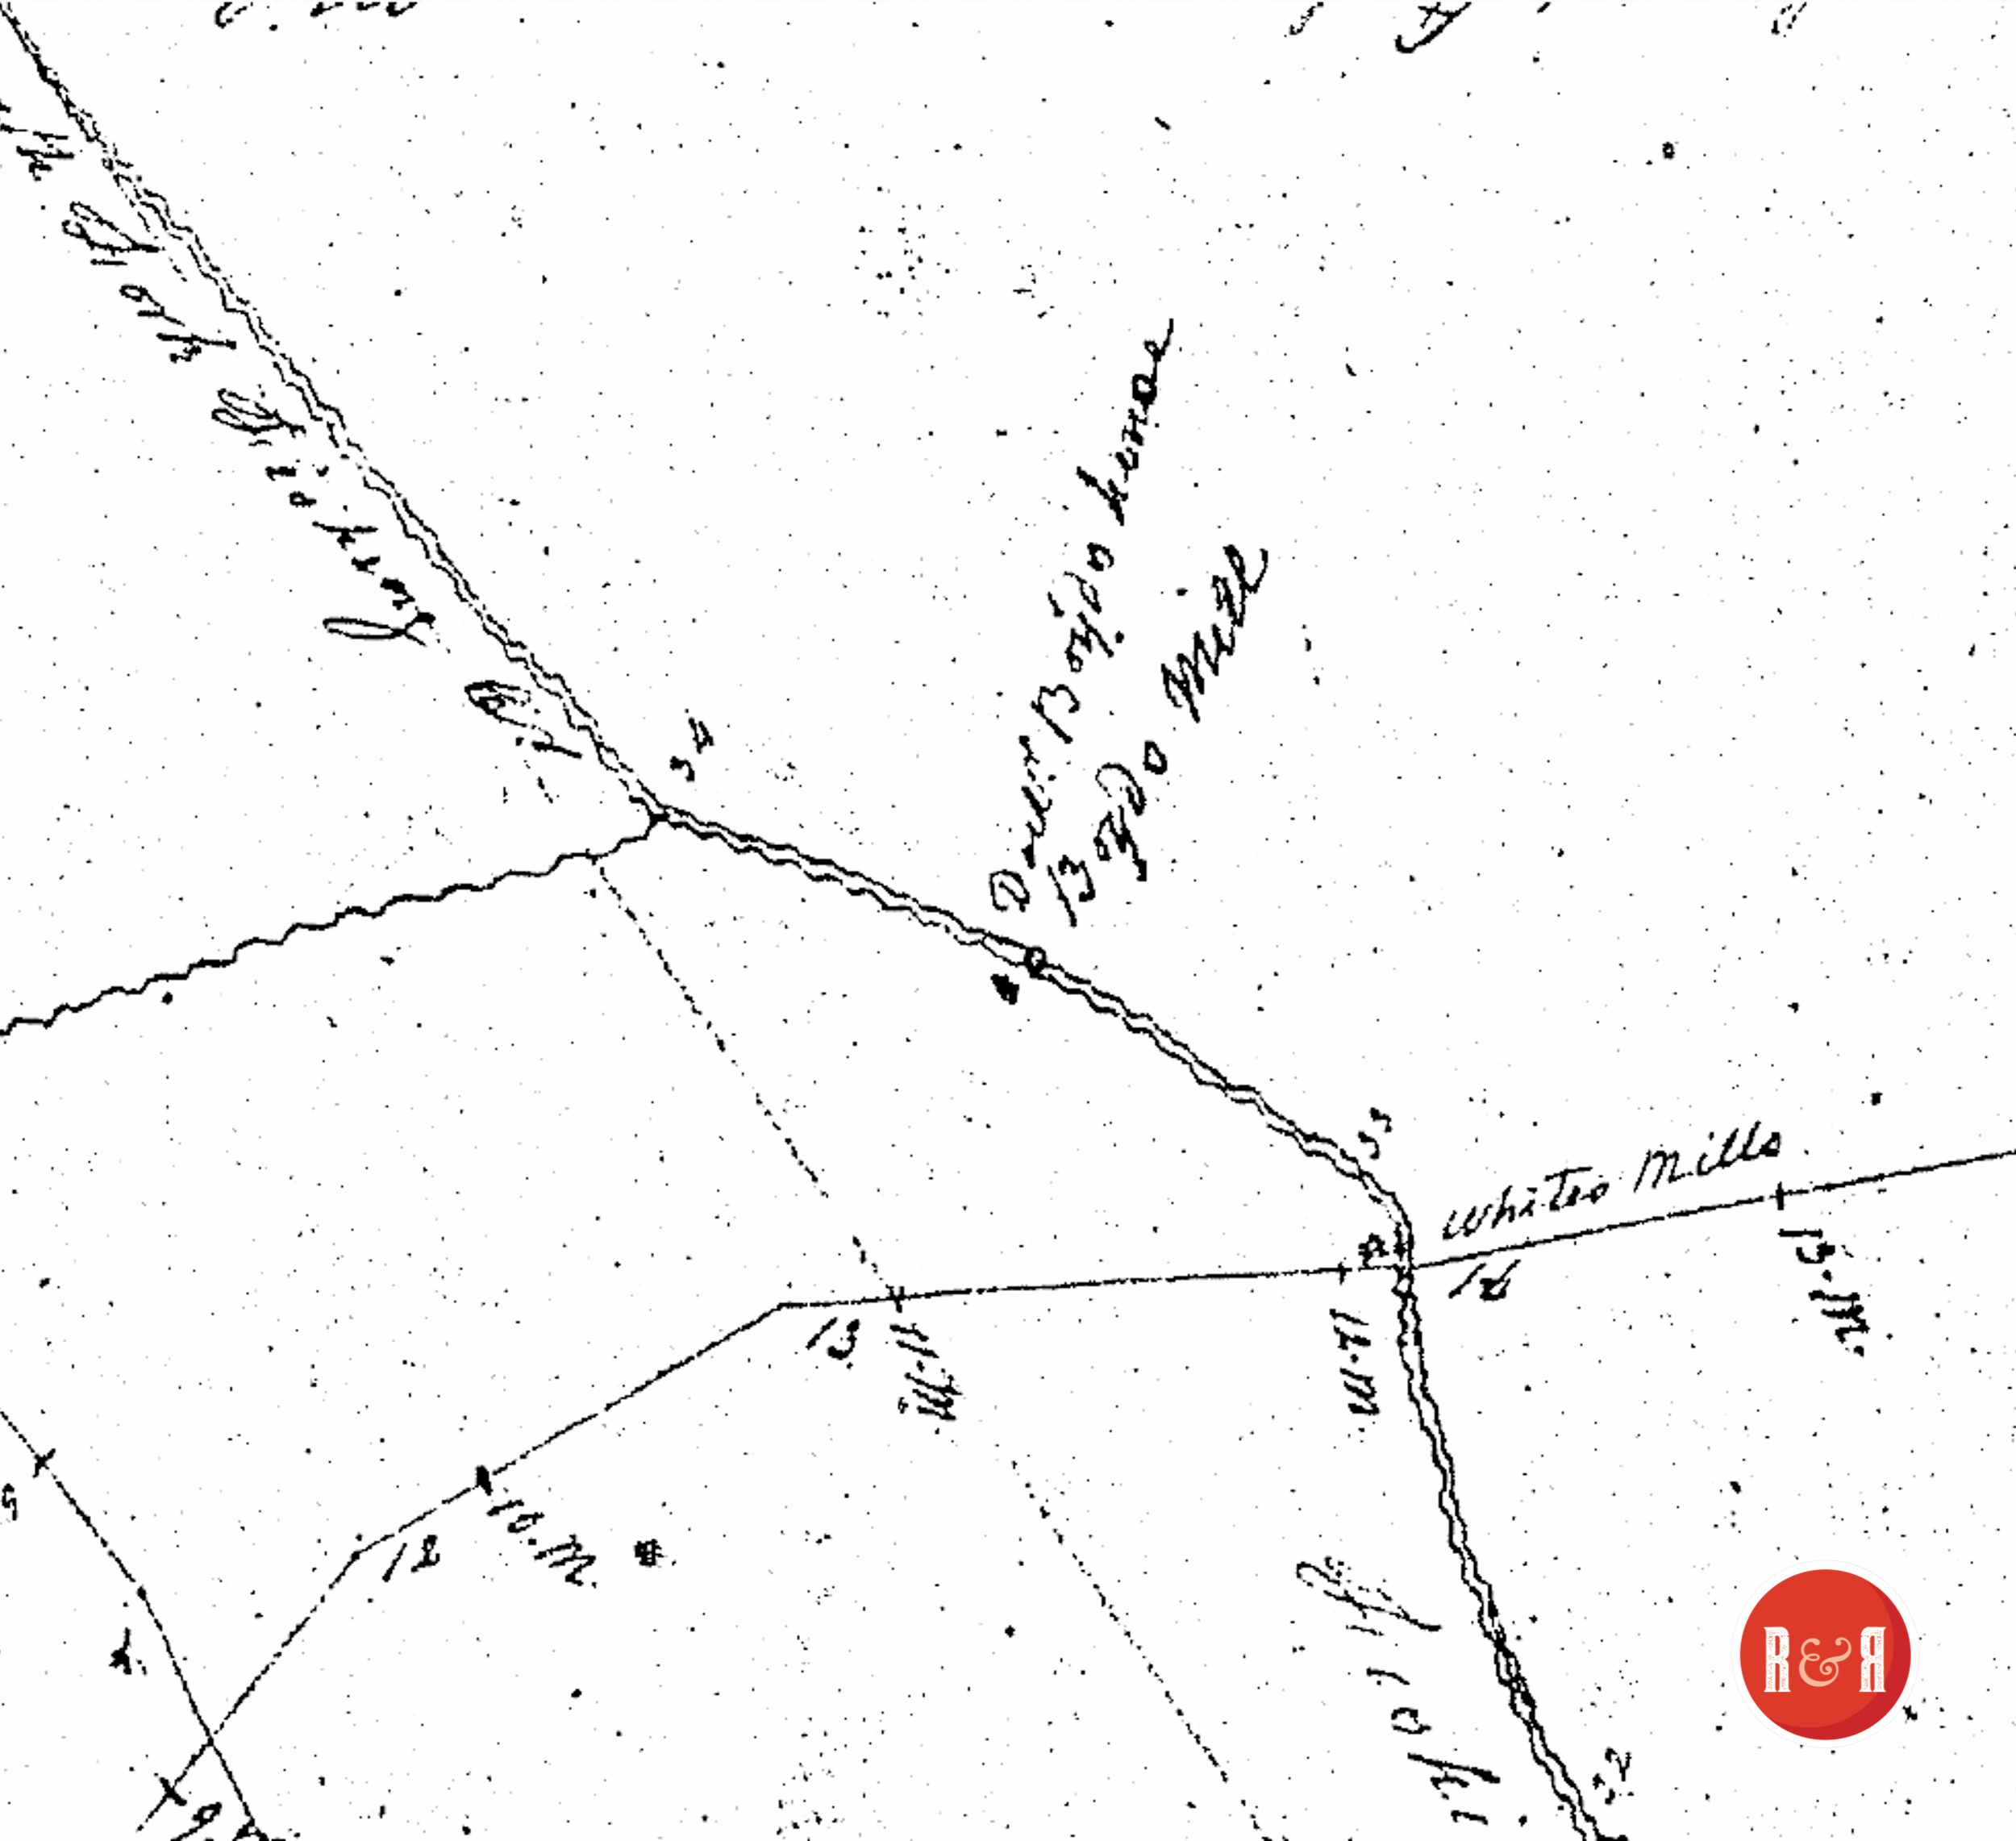 White's Mill at Lando, S.C.  Image via Boyd's 1818 Survey Map of Chester Co., S.C.